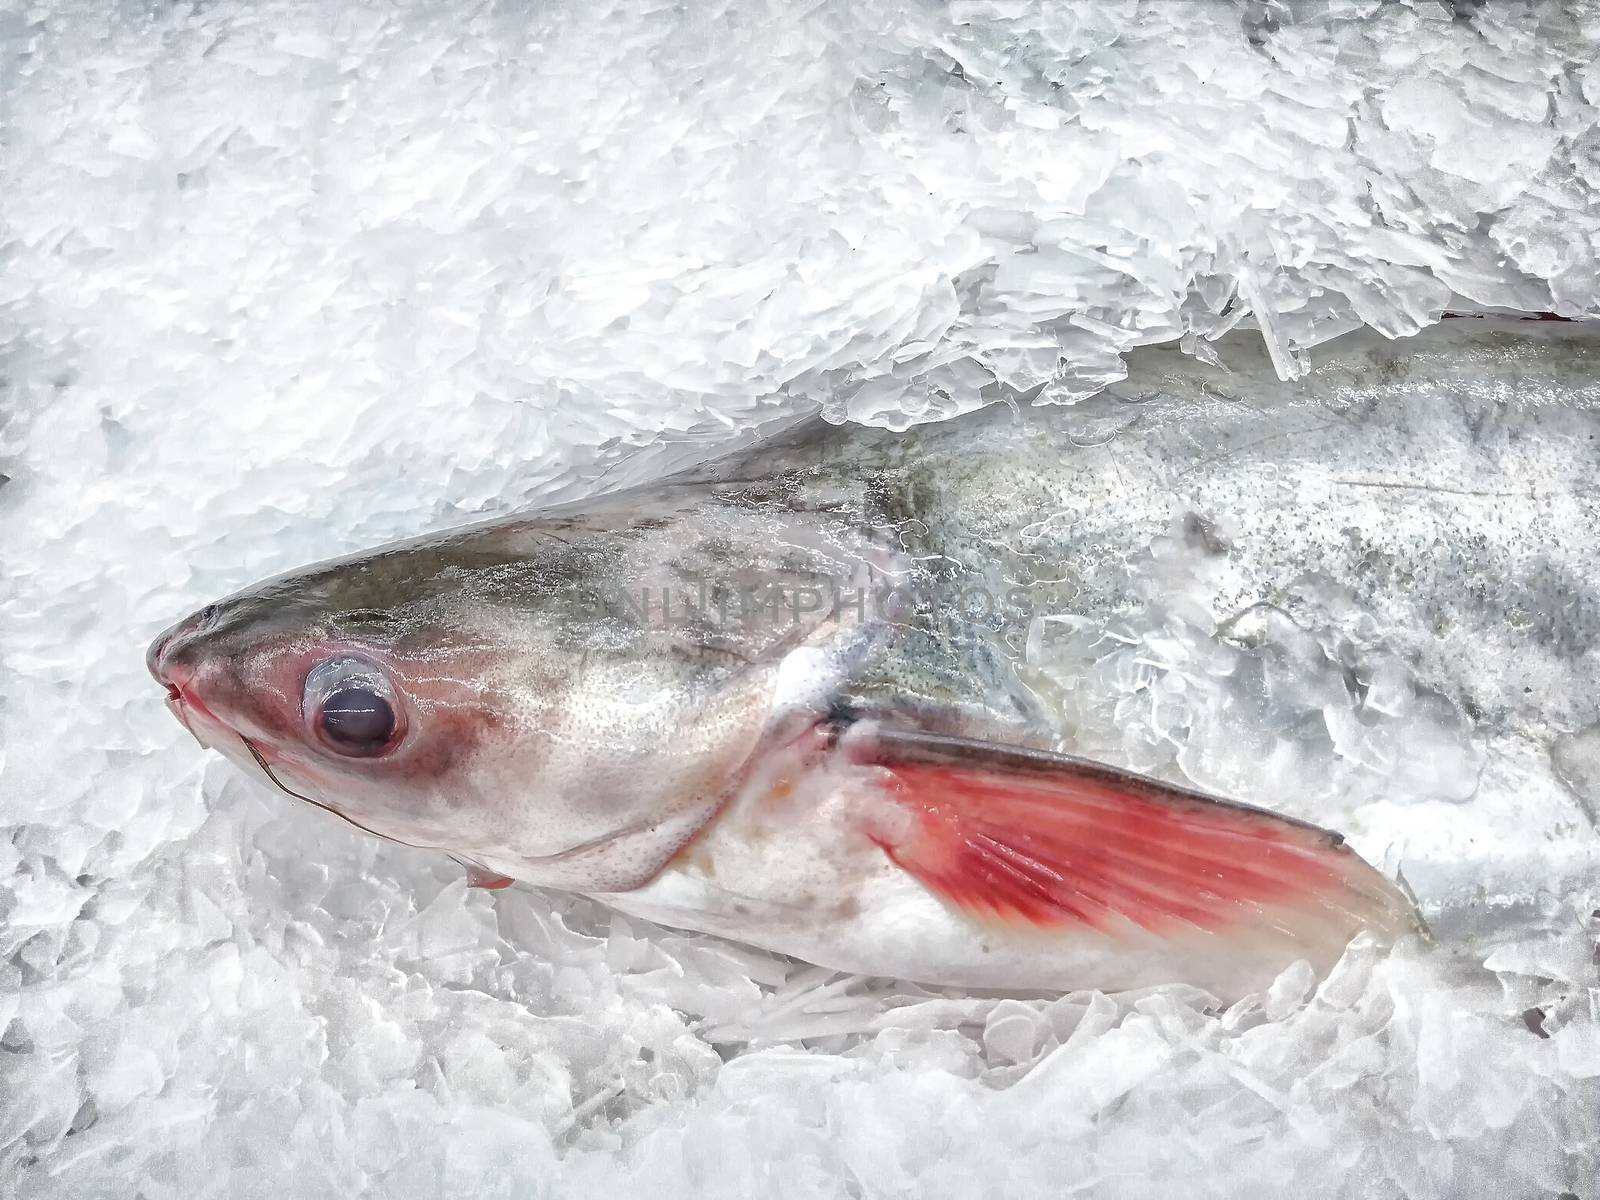 Striped Catfish Kept Fresh with Ice in the Market